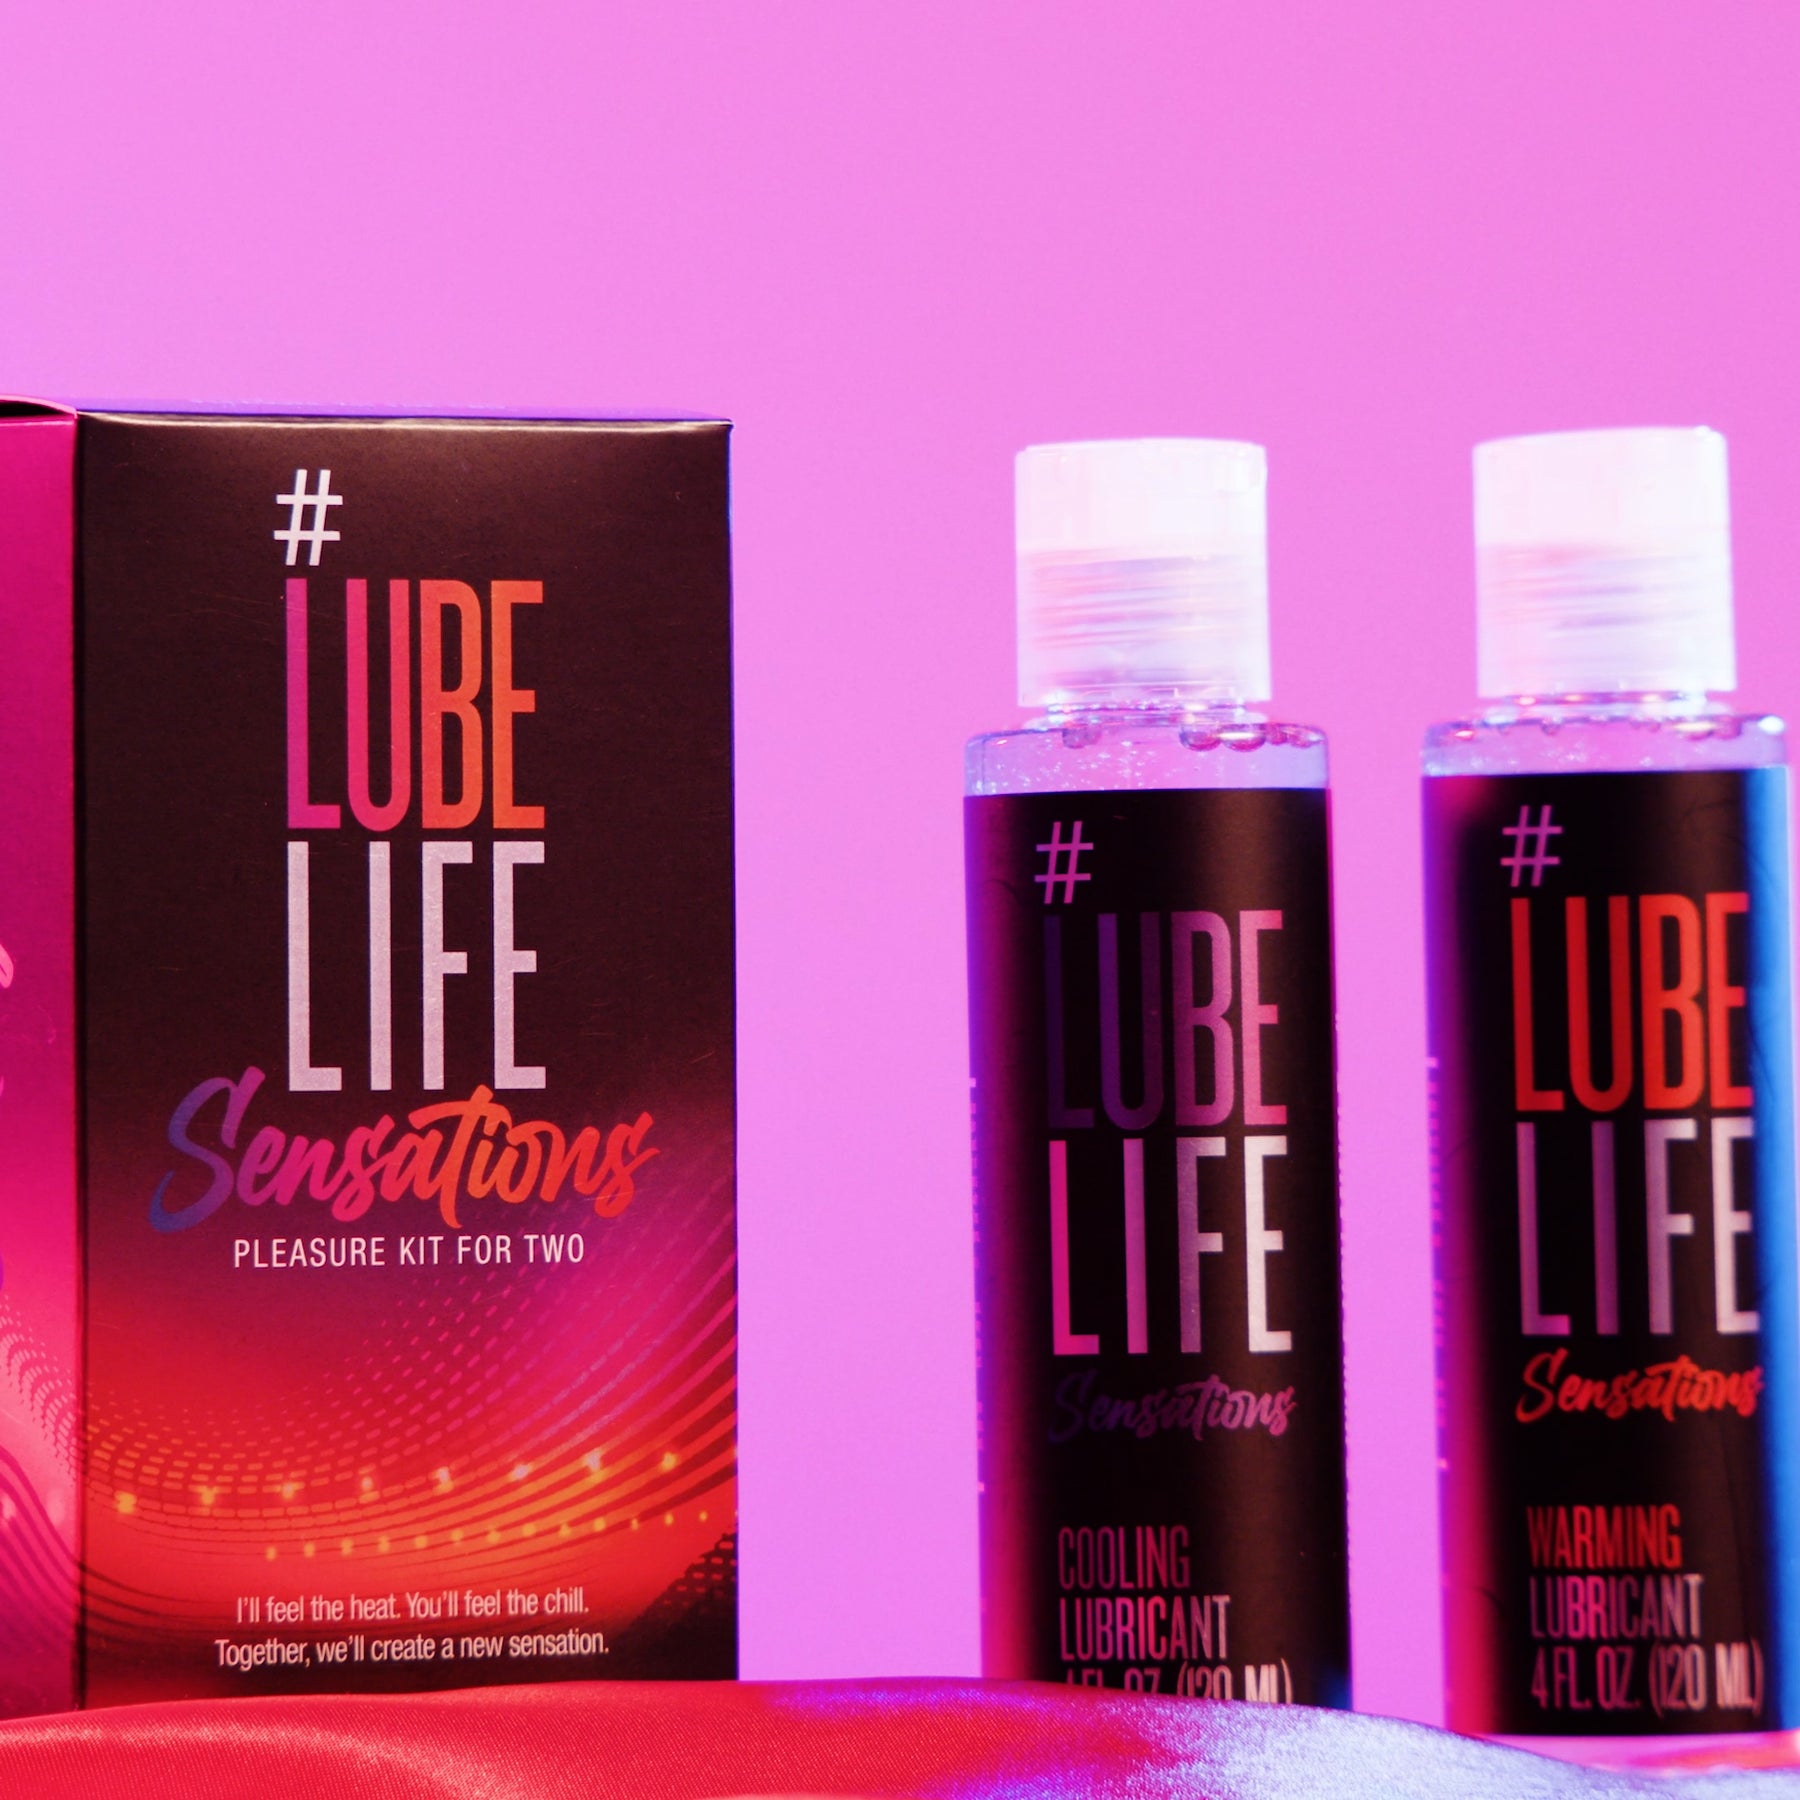 $3/mo - Finance Lube Life Water-Based Cooling Personal Lubricant, Cool  Tingling Sensation Lube for Men, Women and Couples, 8 Fl Oz